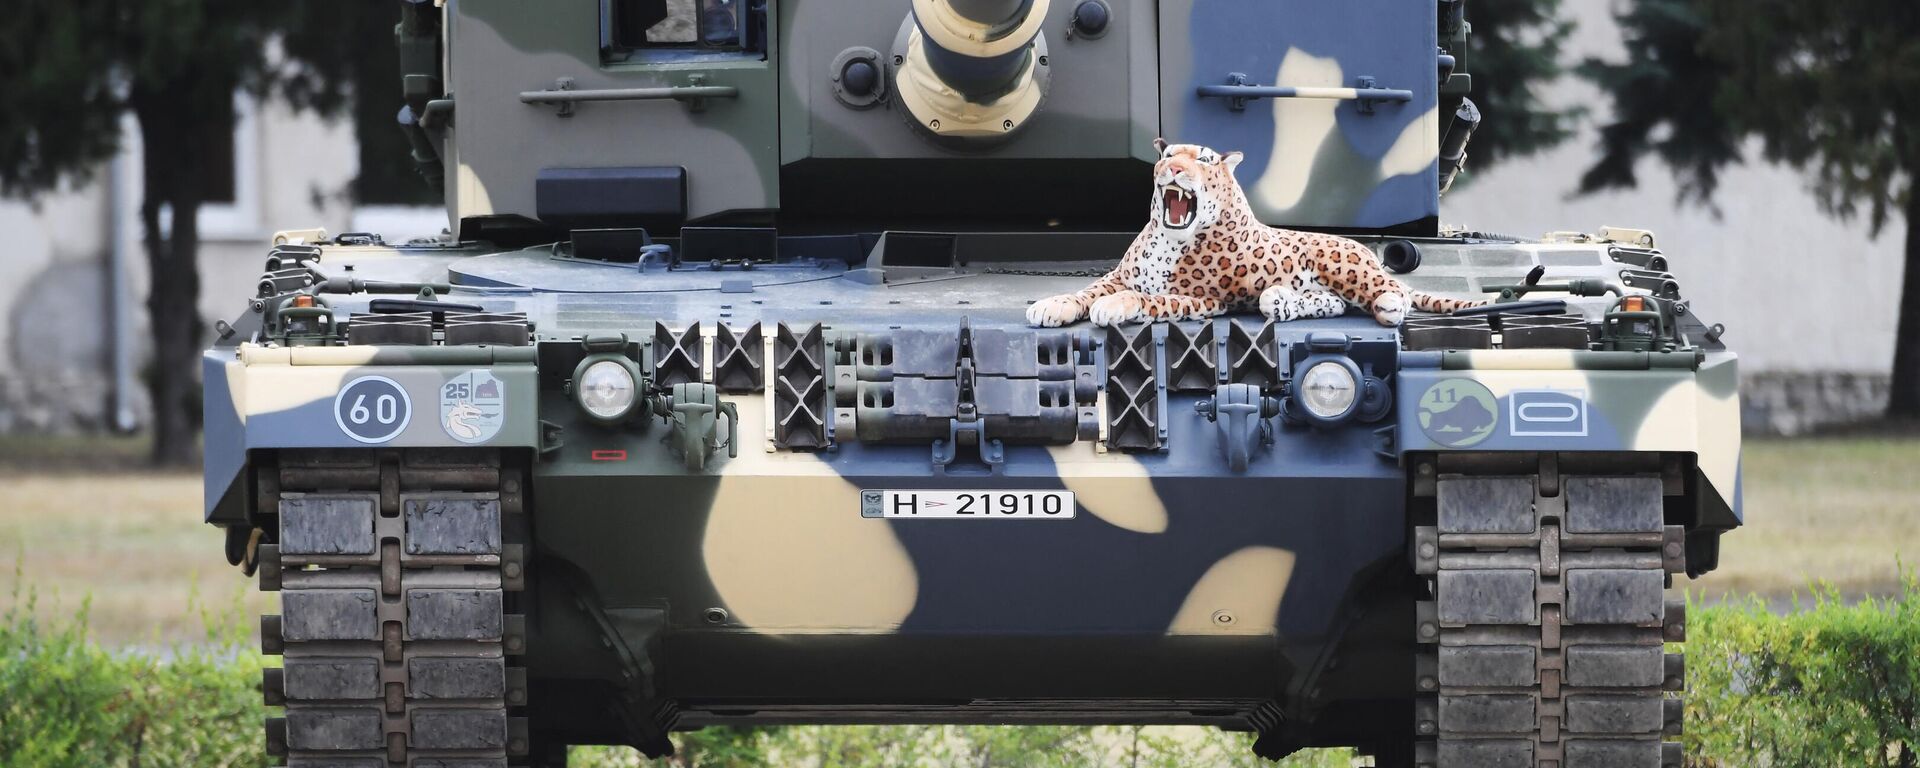 A stuffed toy leopard is placed on a Leopard 2/A4 battle tank during a handover ceremony of tanks at the army base of Tata, Hungary, on July 24, 2020 - Sputnik International, 1920, 25.01.2023